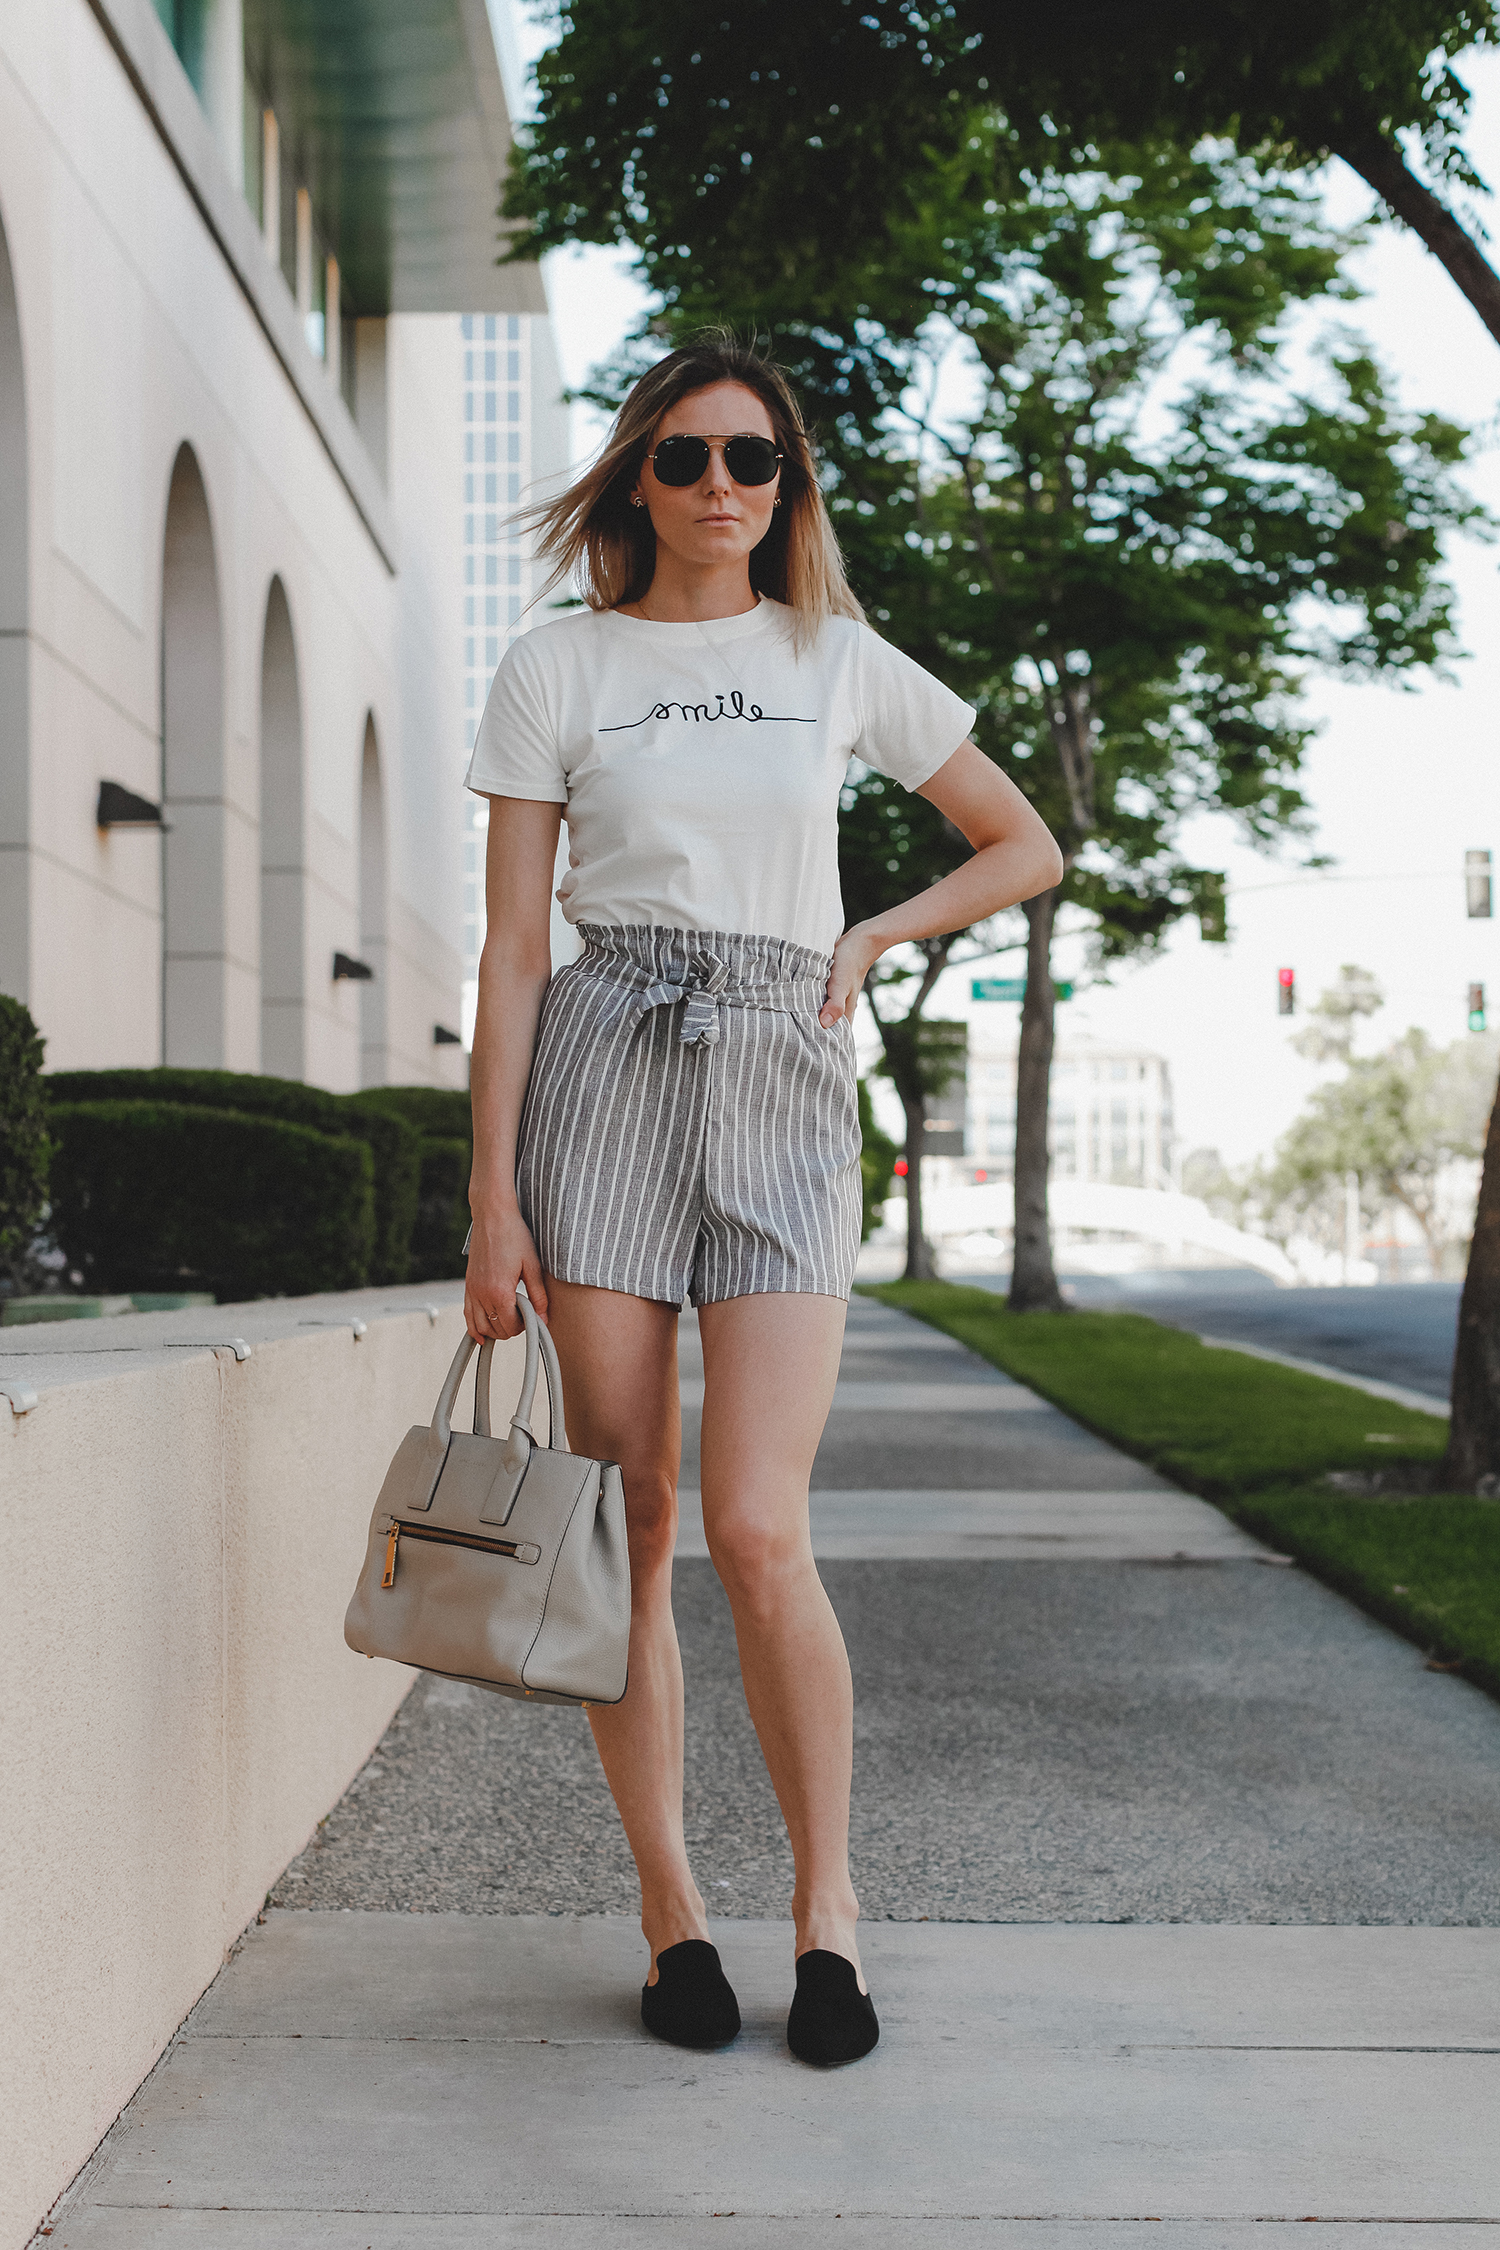 Paper bag shorts trend featured by top US fashion blog, Tea Cups & Tulips: image of a woman wearing Light grey paper bag shorts and a smile tee